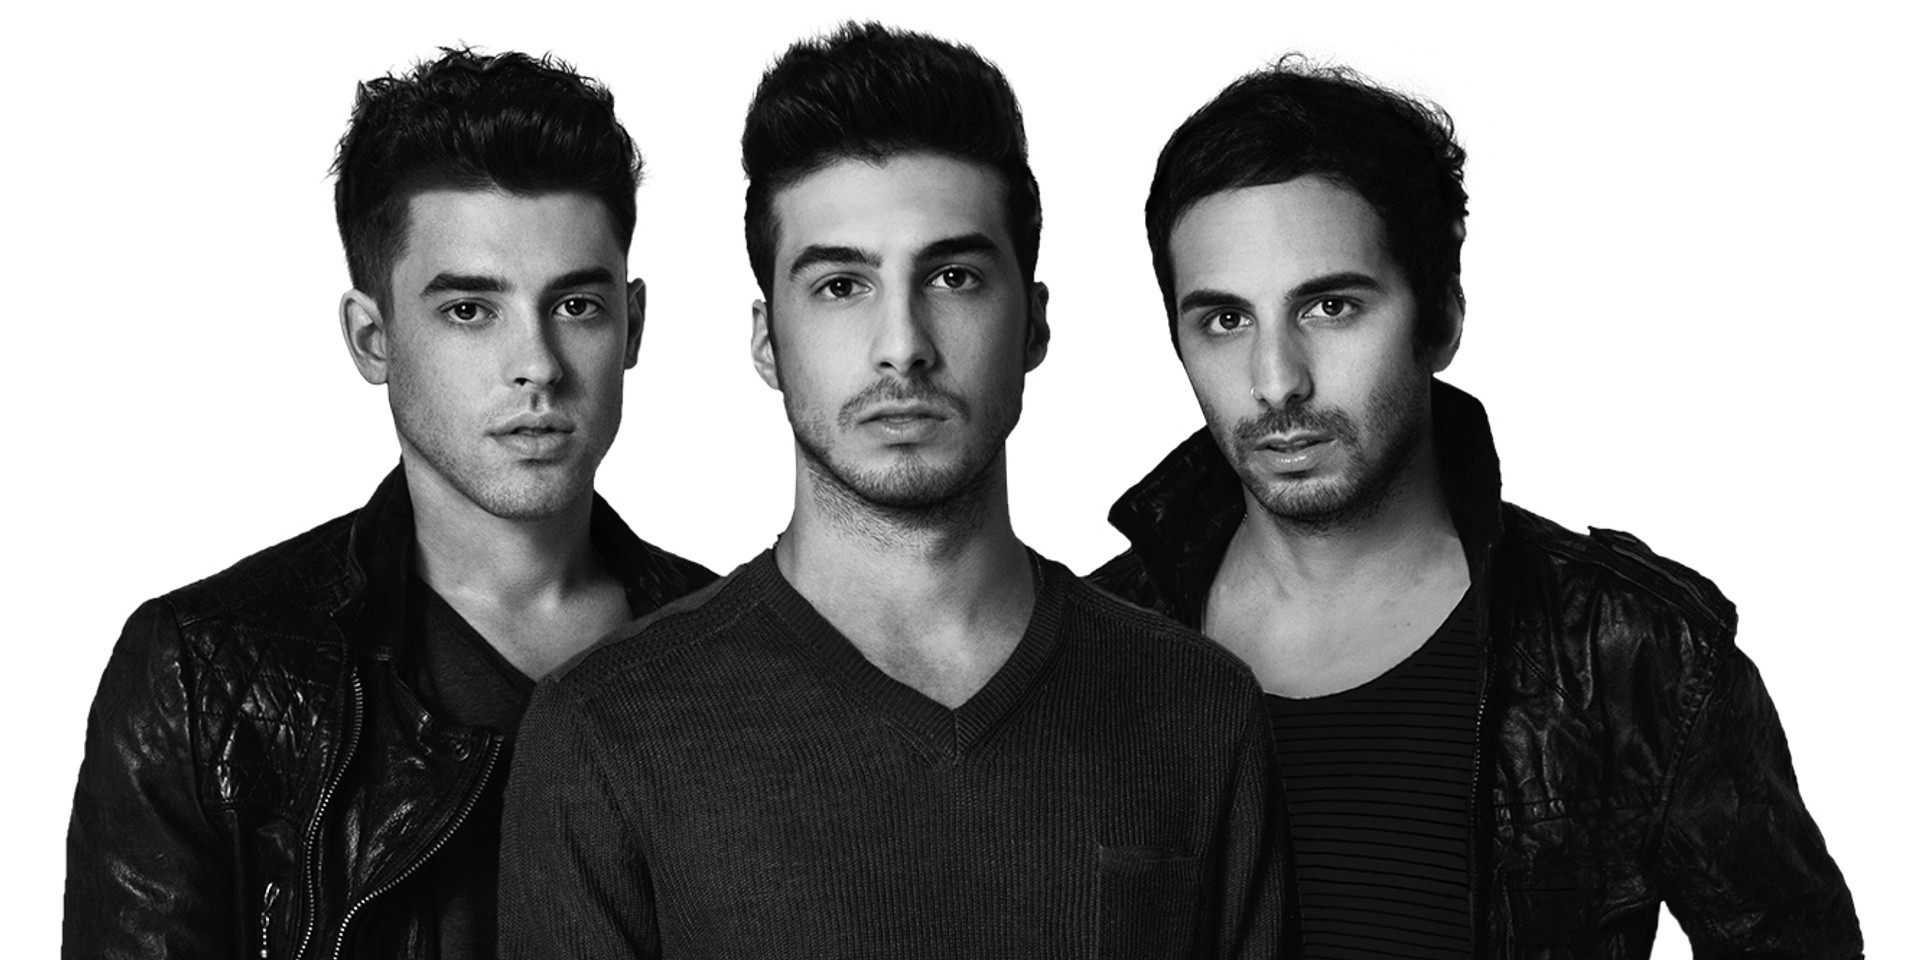 Cash Cash talk transitioning from pop-rock to EDM and more onboard It's The Ship 2018